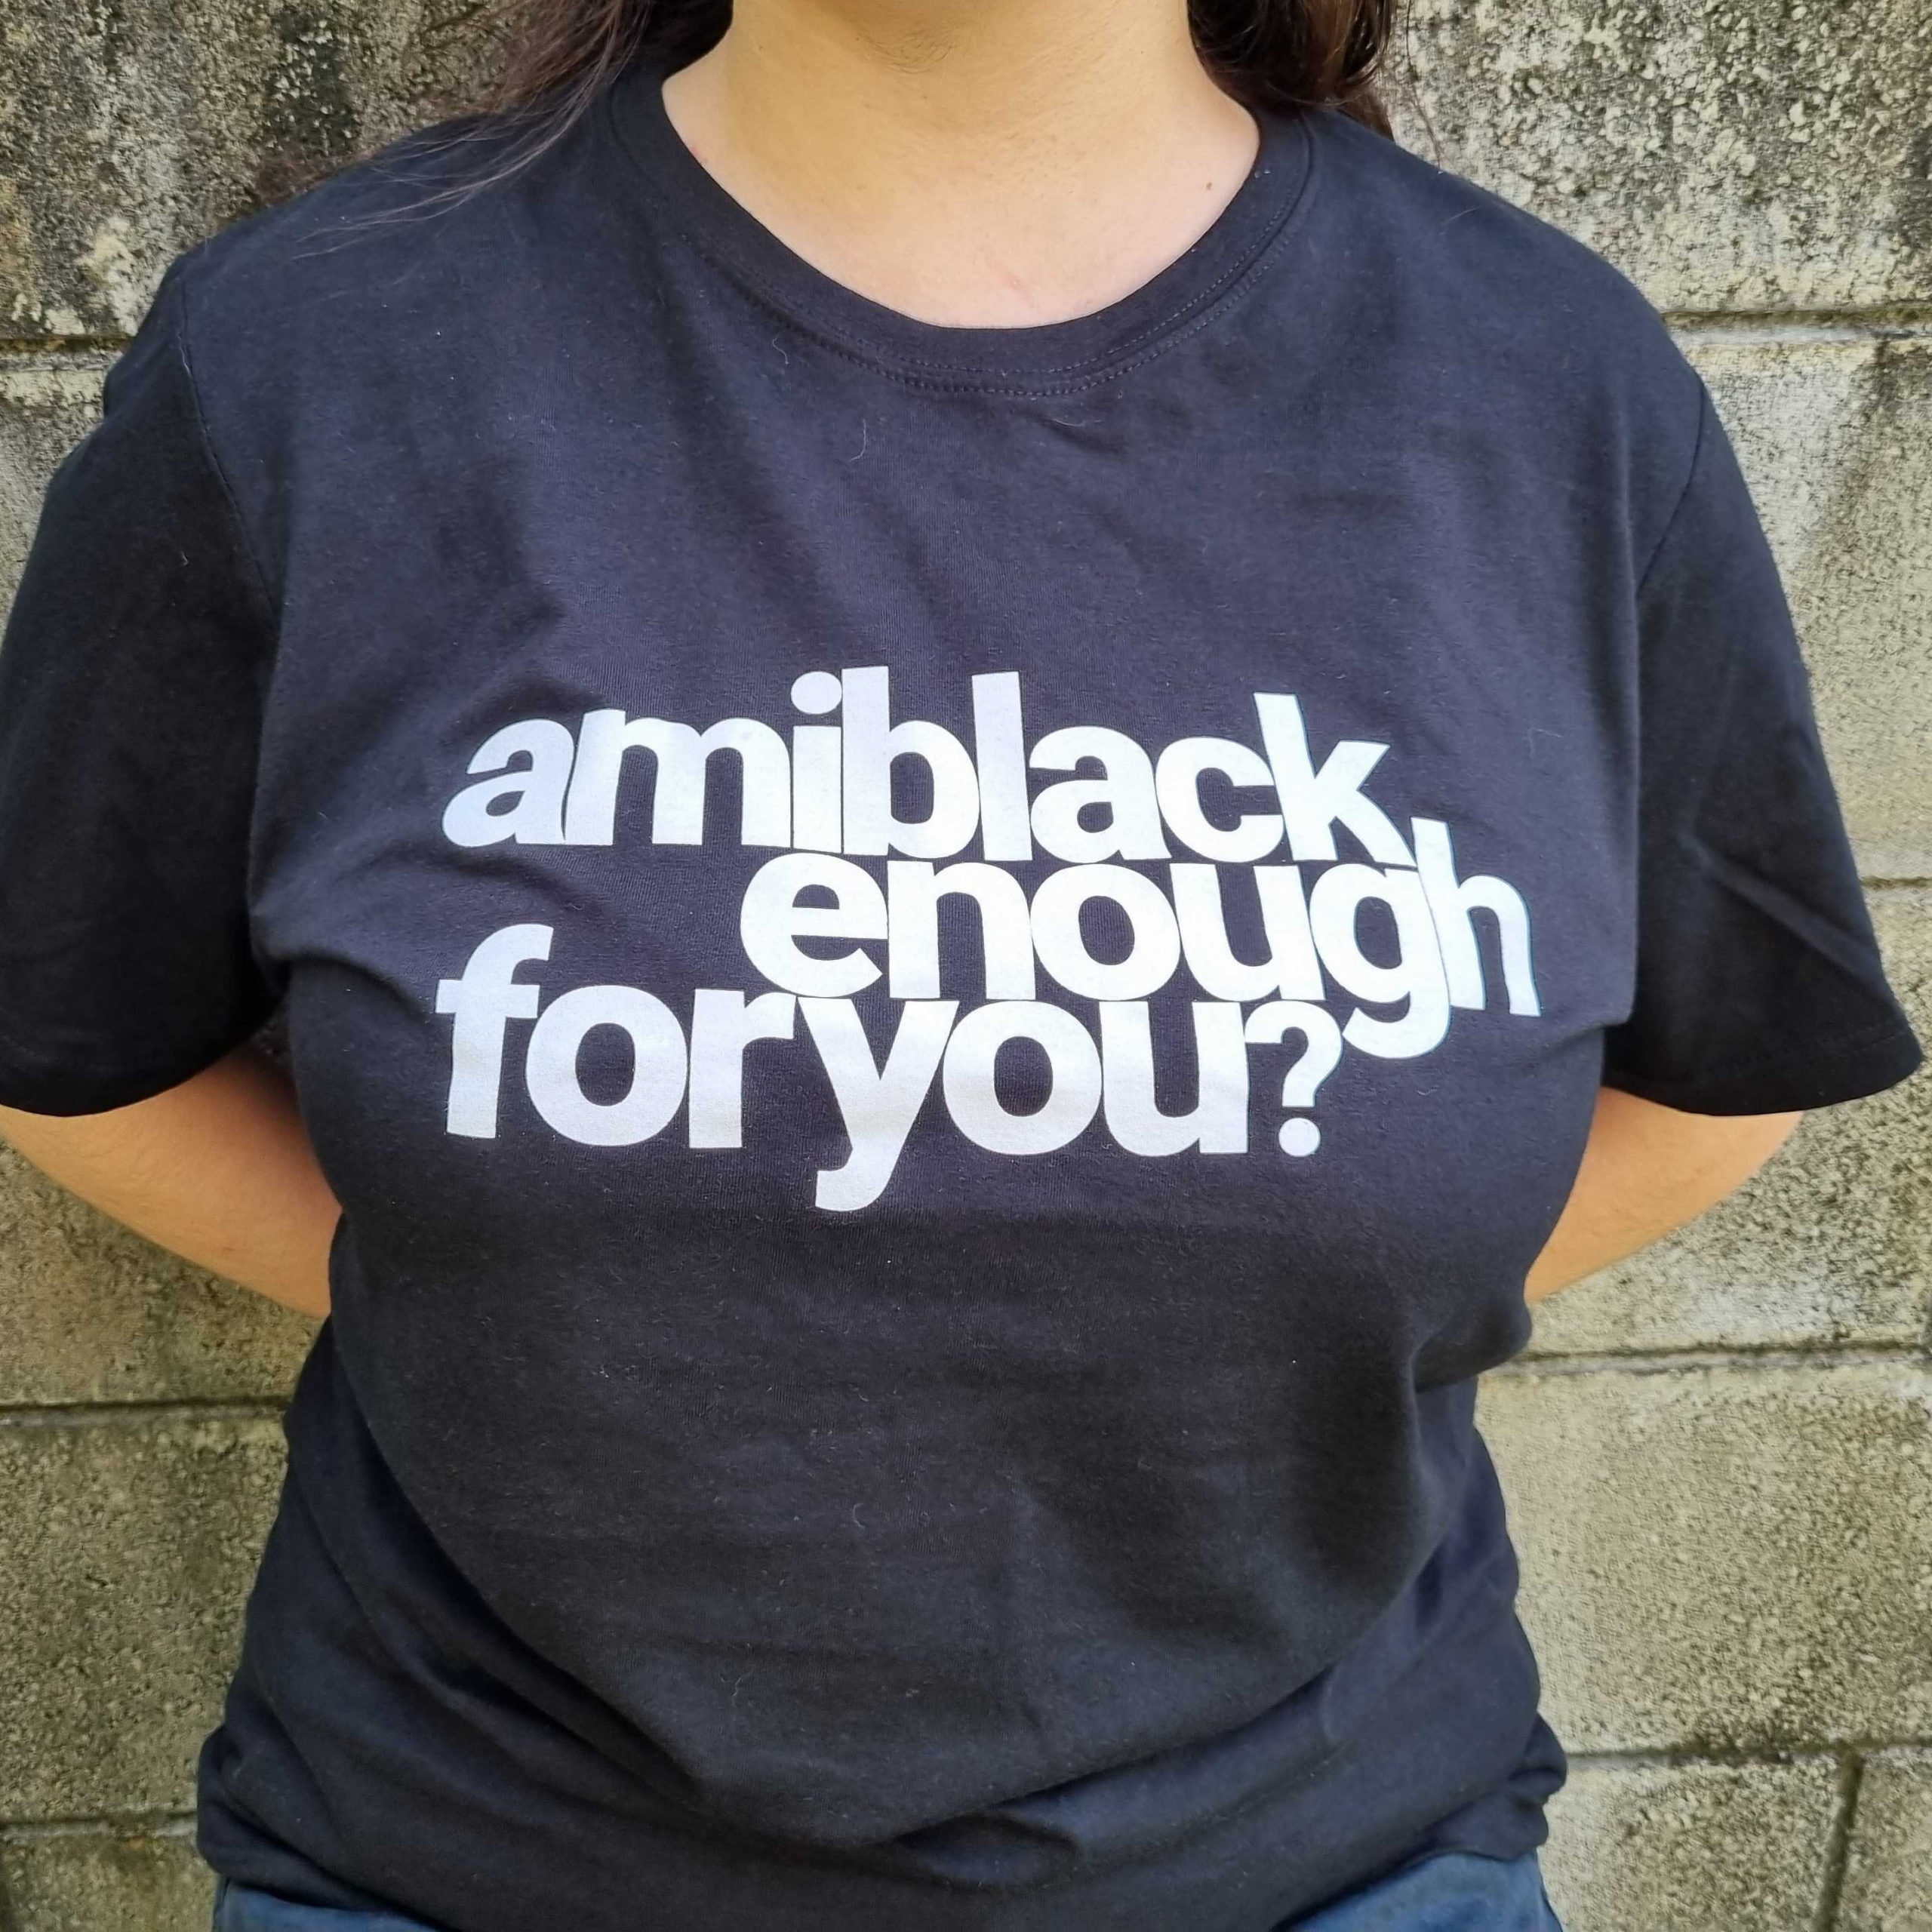 Against a concrete wall, a female person wearing a black tshirt with white bold text amiblackenoughforyou?